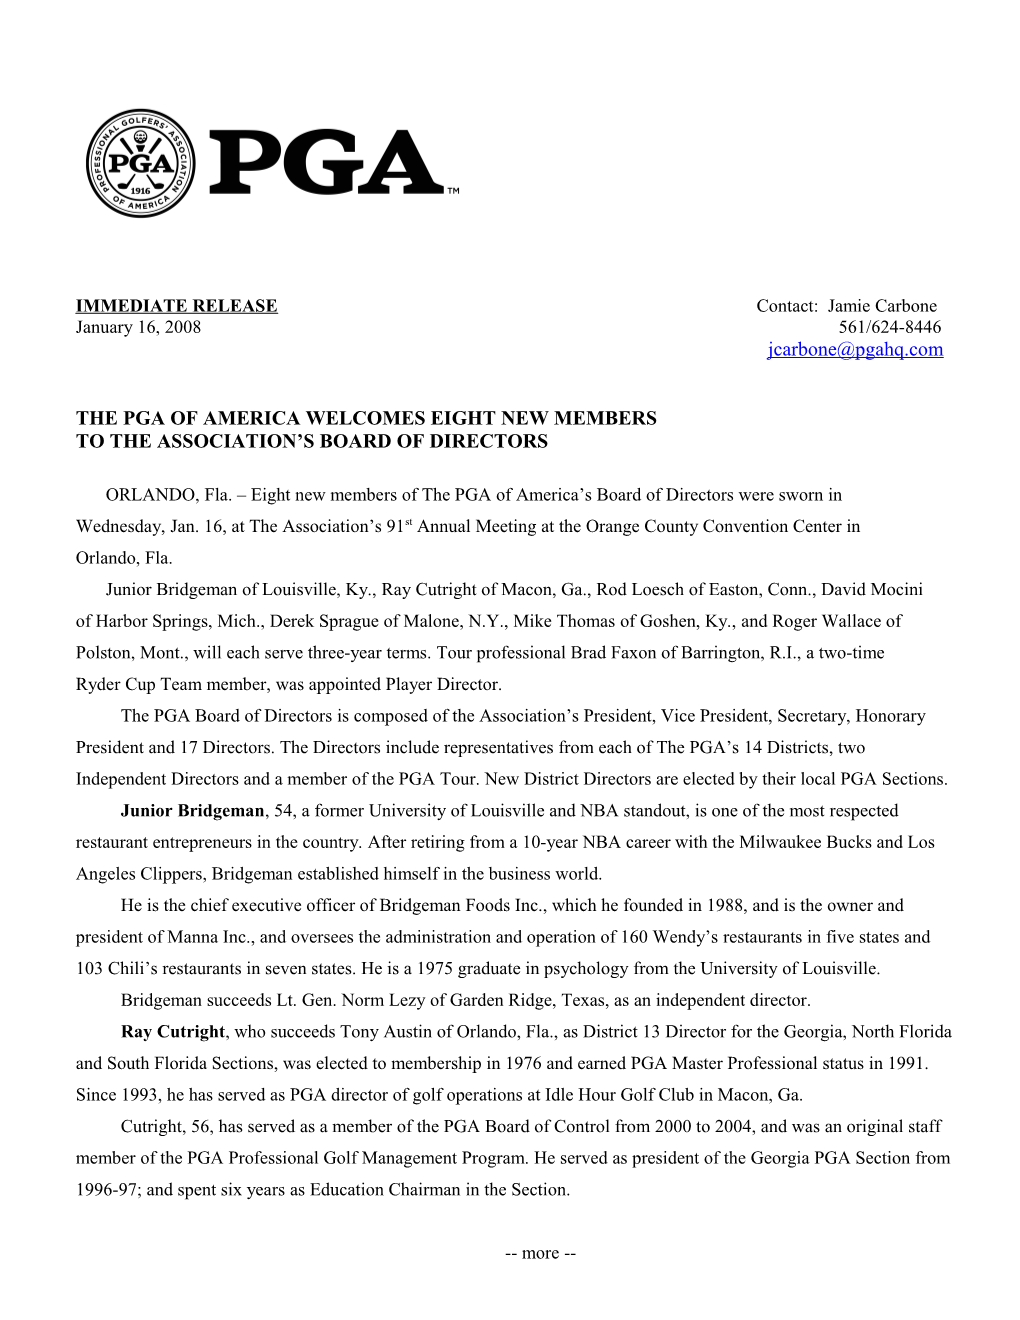 The Pga of America Welcomes Eight New Members